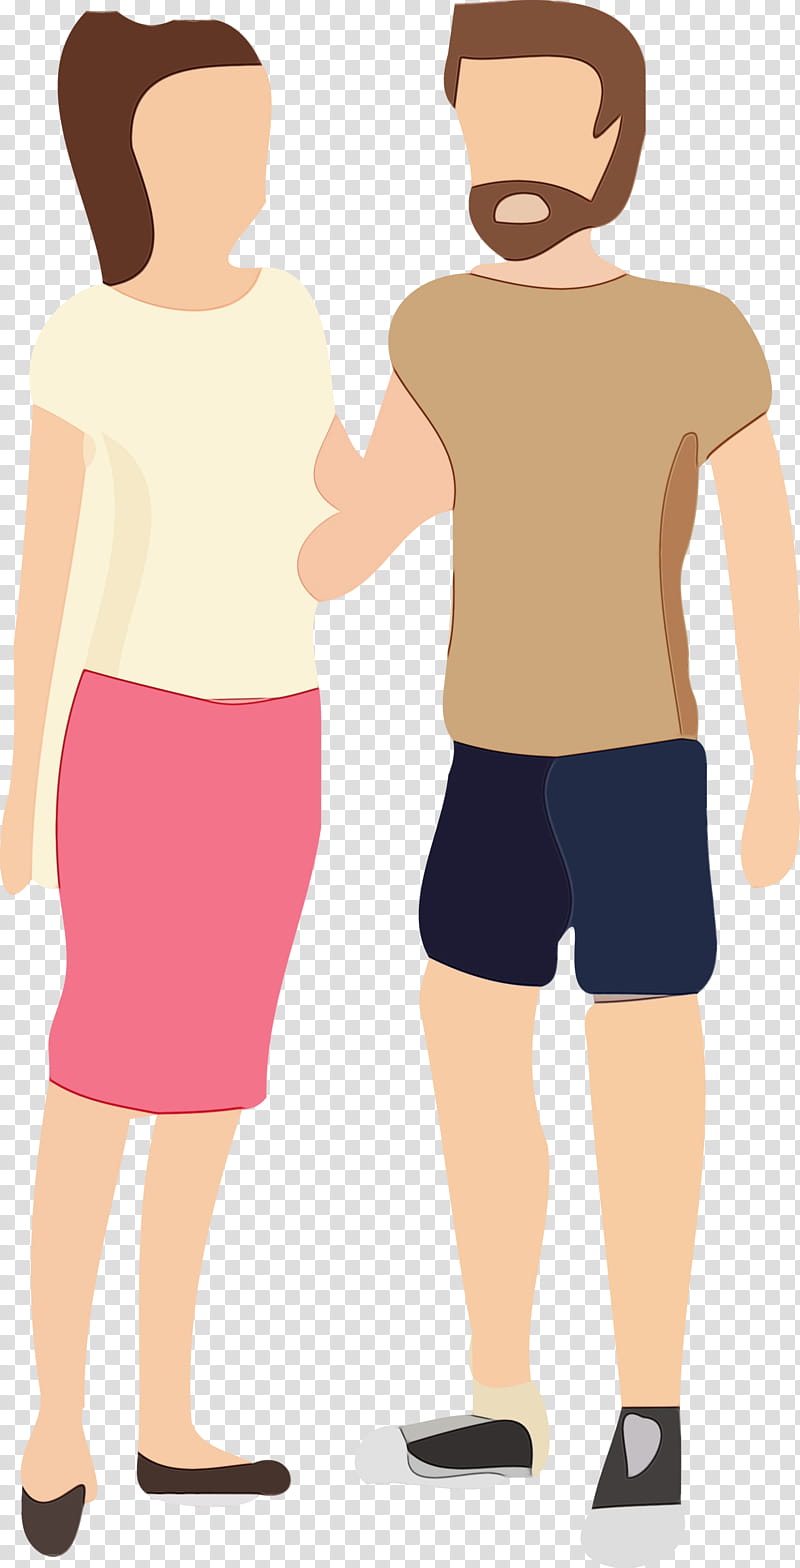 Holding hands, Couple, Lover, Watercolor, Paint, Wet Ink, People, Clothing transparent background PNG clipart